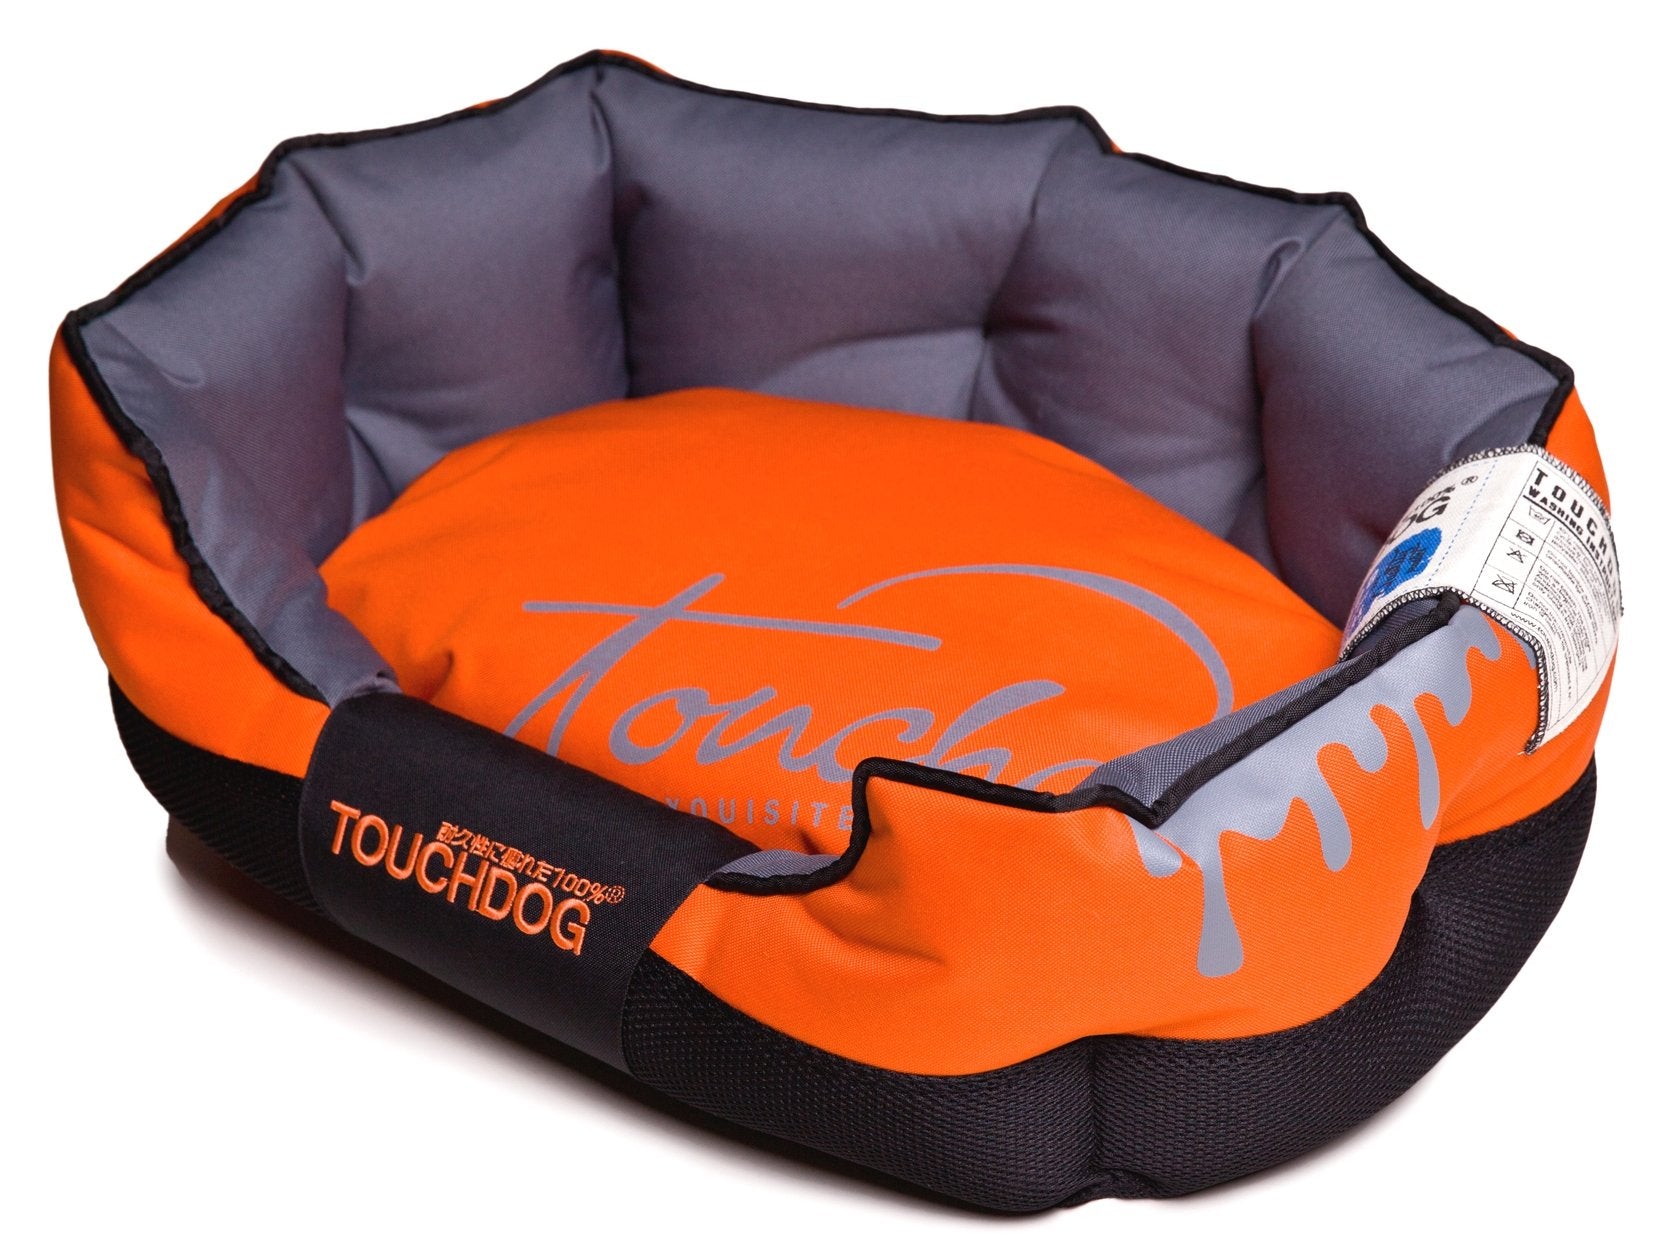 Touchdog® Performance-Max Cushioned Dog Bed - Pink/Black - Large